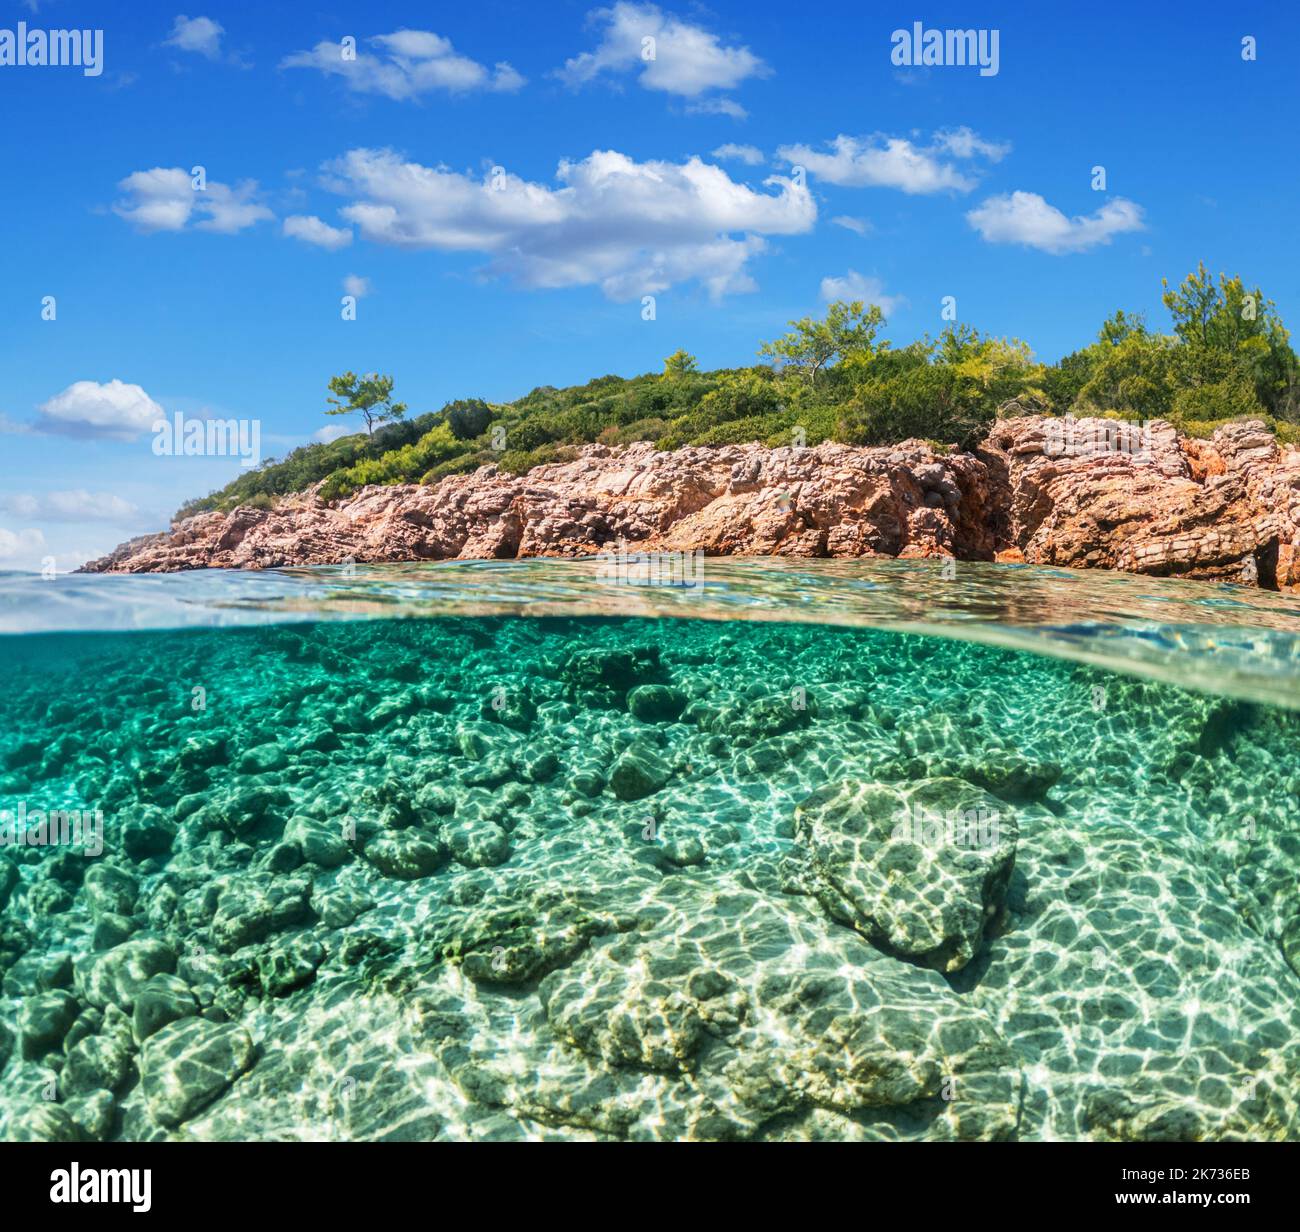 Split view - half underwater view of beautiful seabed and rocky coastline with pine trees, Turkey, Bodrum. Stock Photo